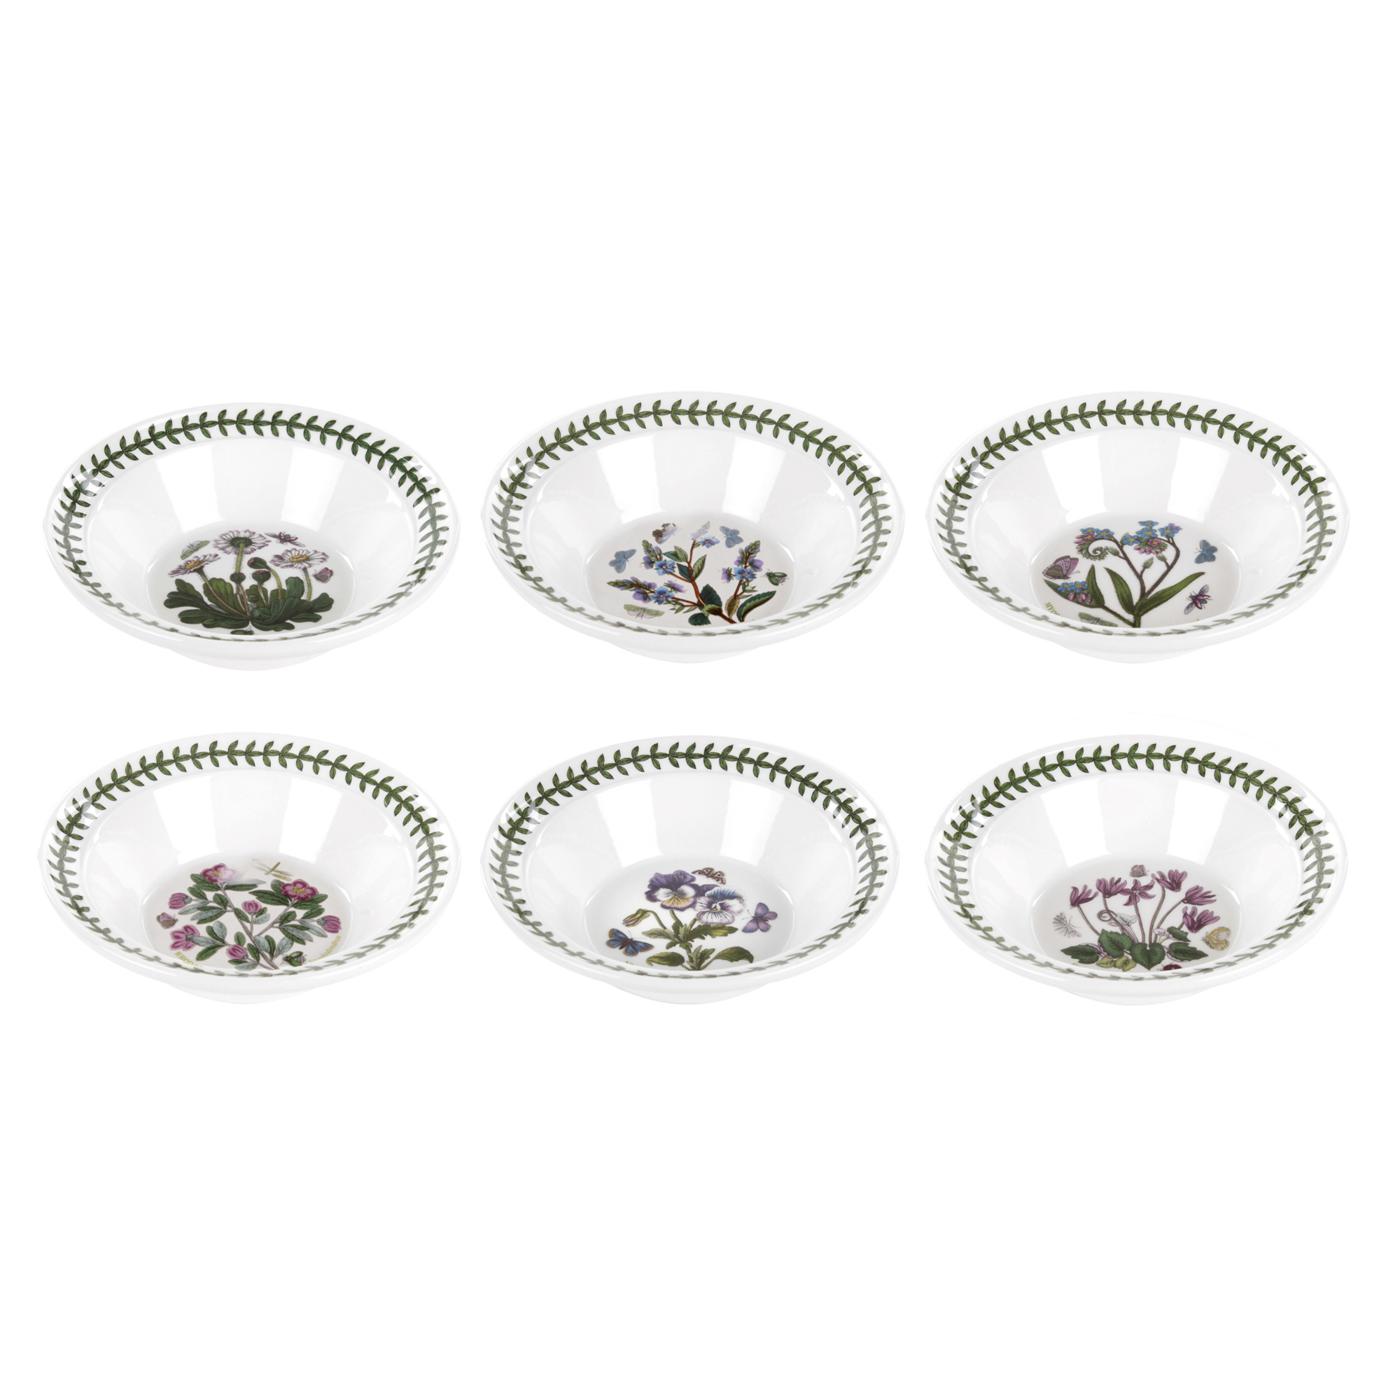 Botanic Garden 6.5 Inch Oatmeal/Soup Bowl Set of 6 (Assorted Motifs) image number null